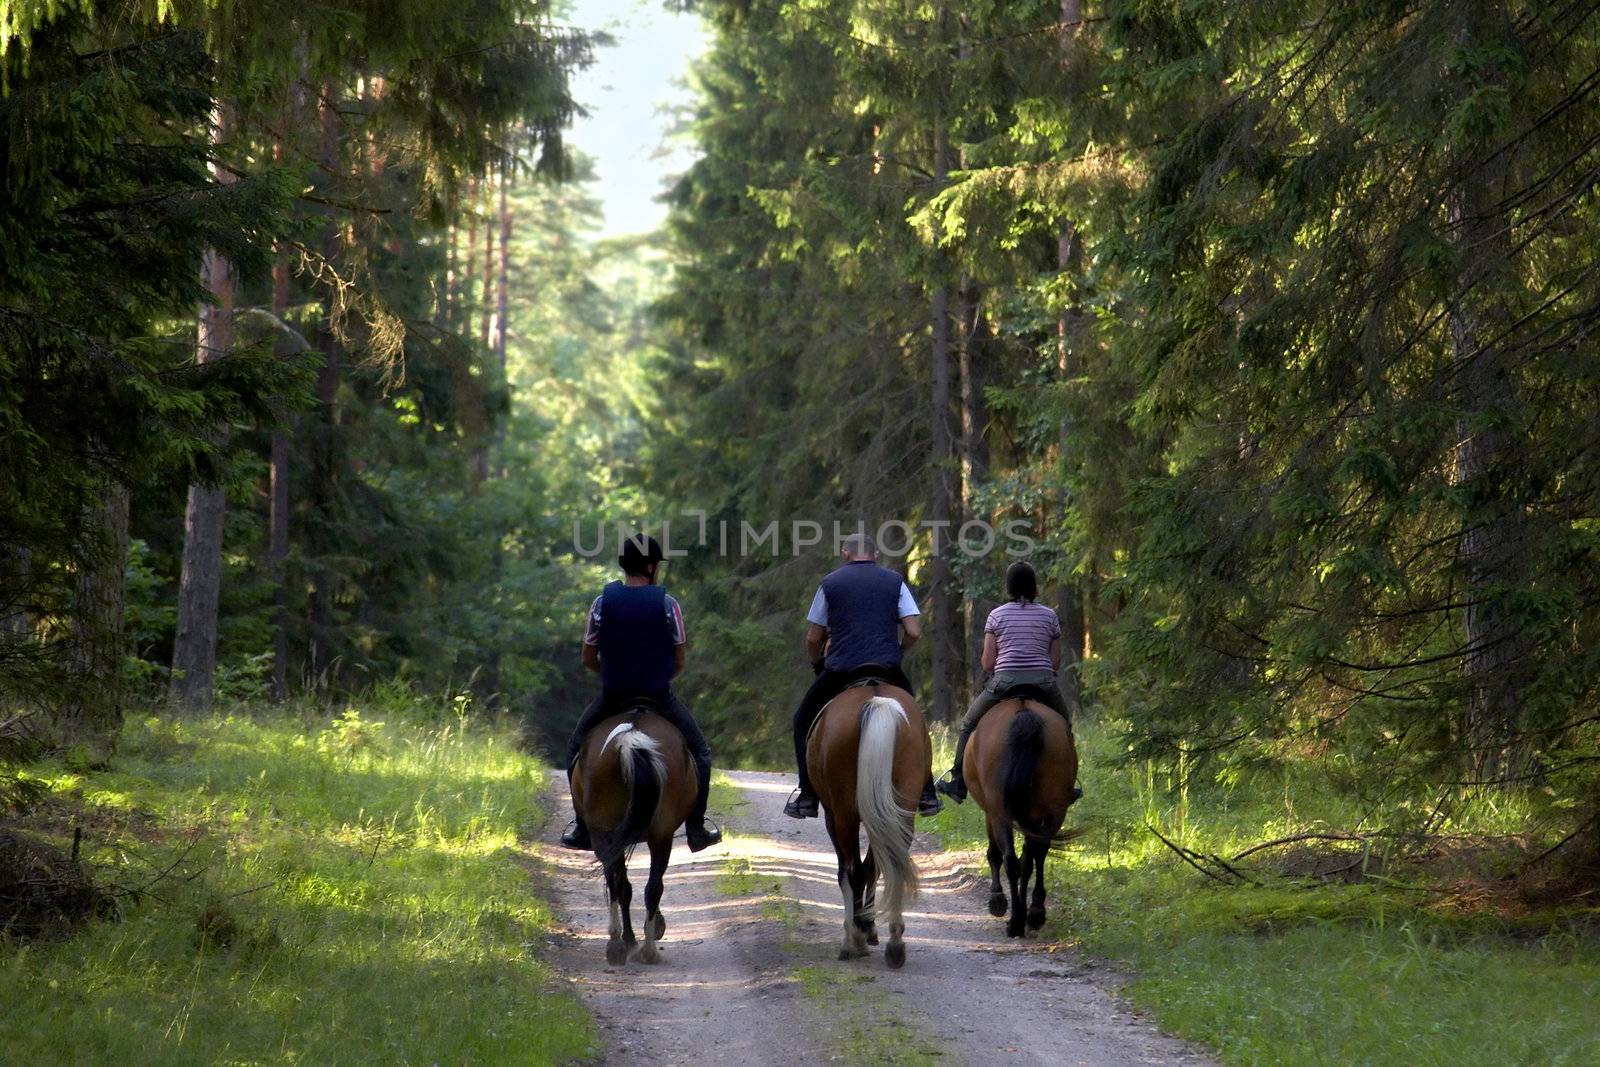 people are going on horse through forest by amaxim